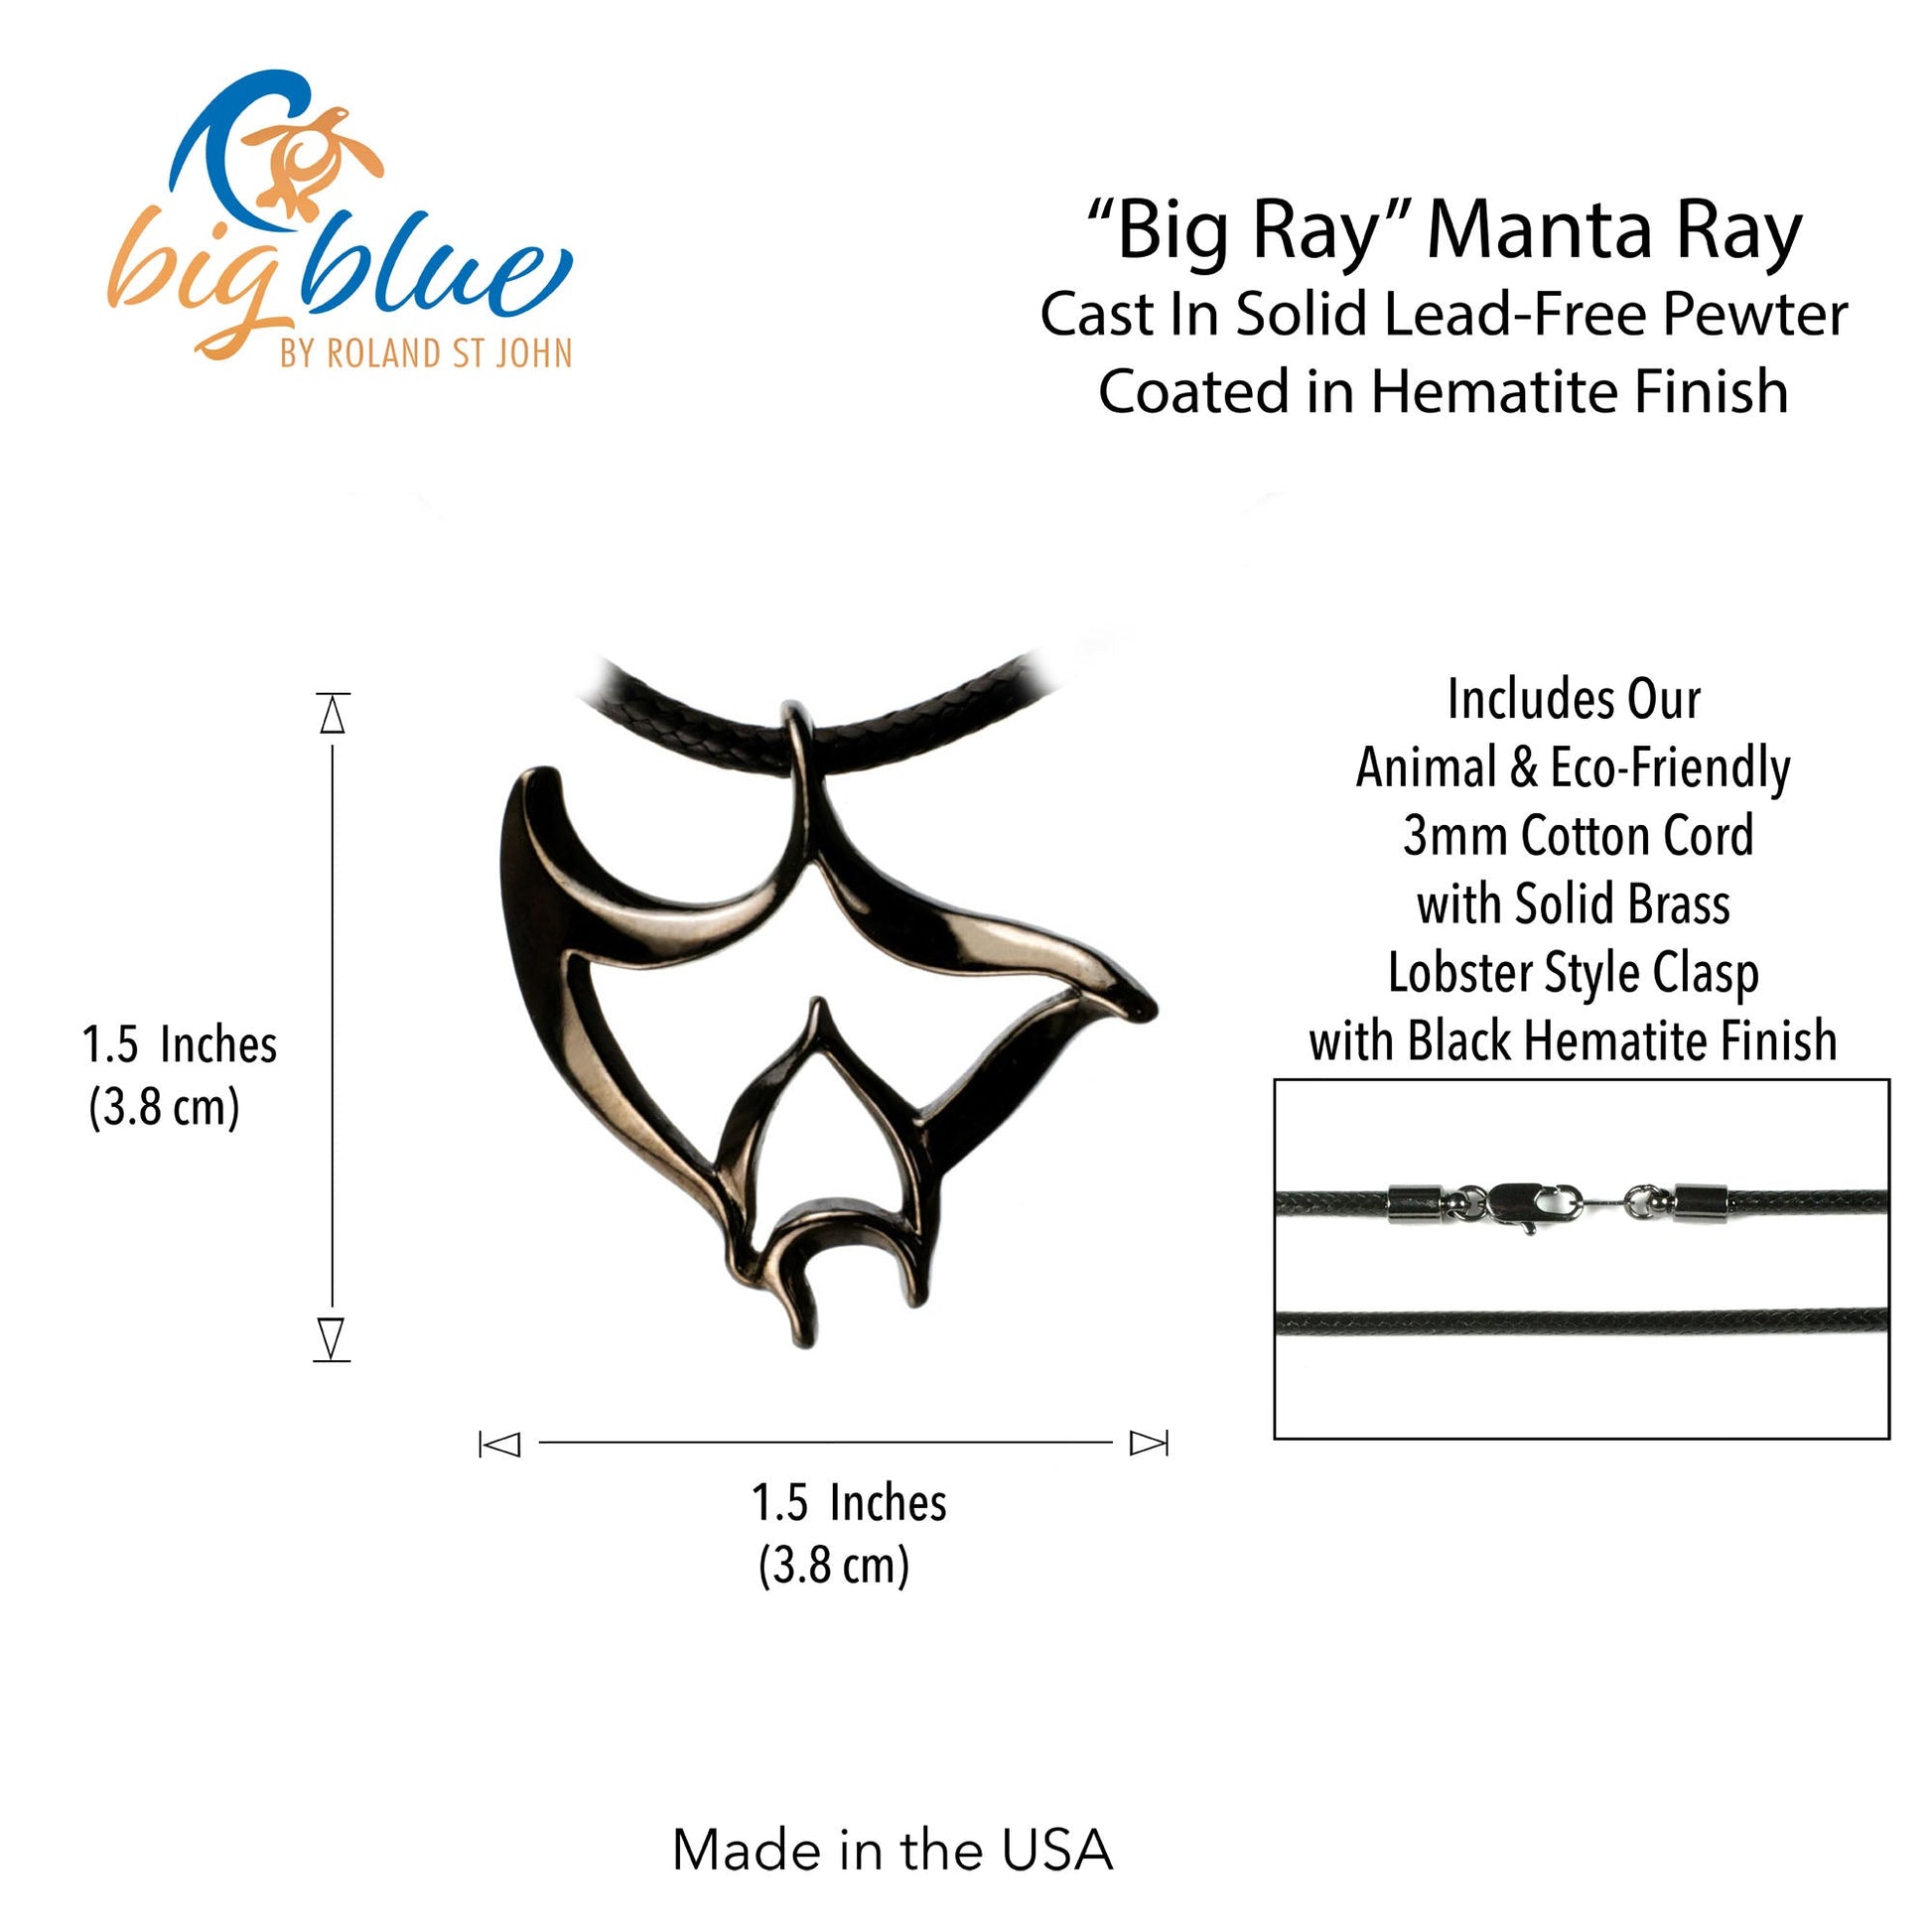 Manta Ray Necklace for Men and Women Hematite - Manta Ray Gift for Women and Men, Stingray Necklace Jet Black, Gifts for Divers, Hematite Jewelry - The Tool Store